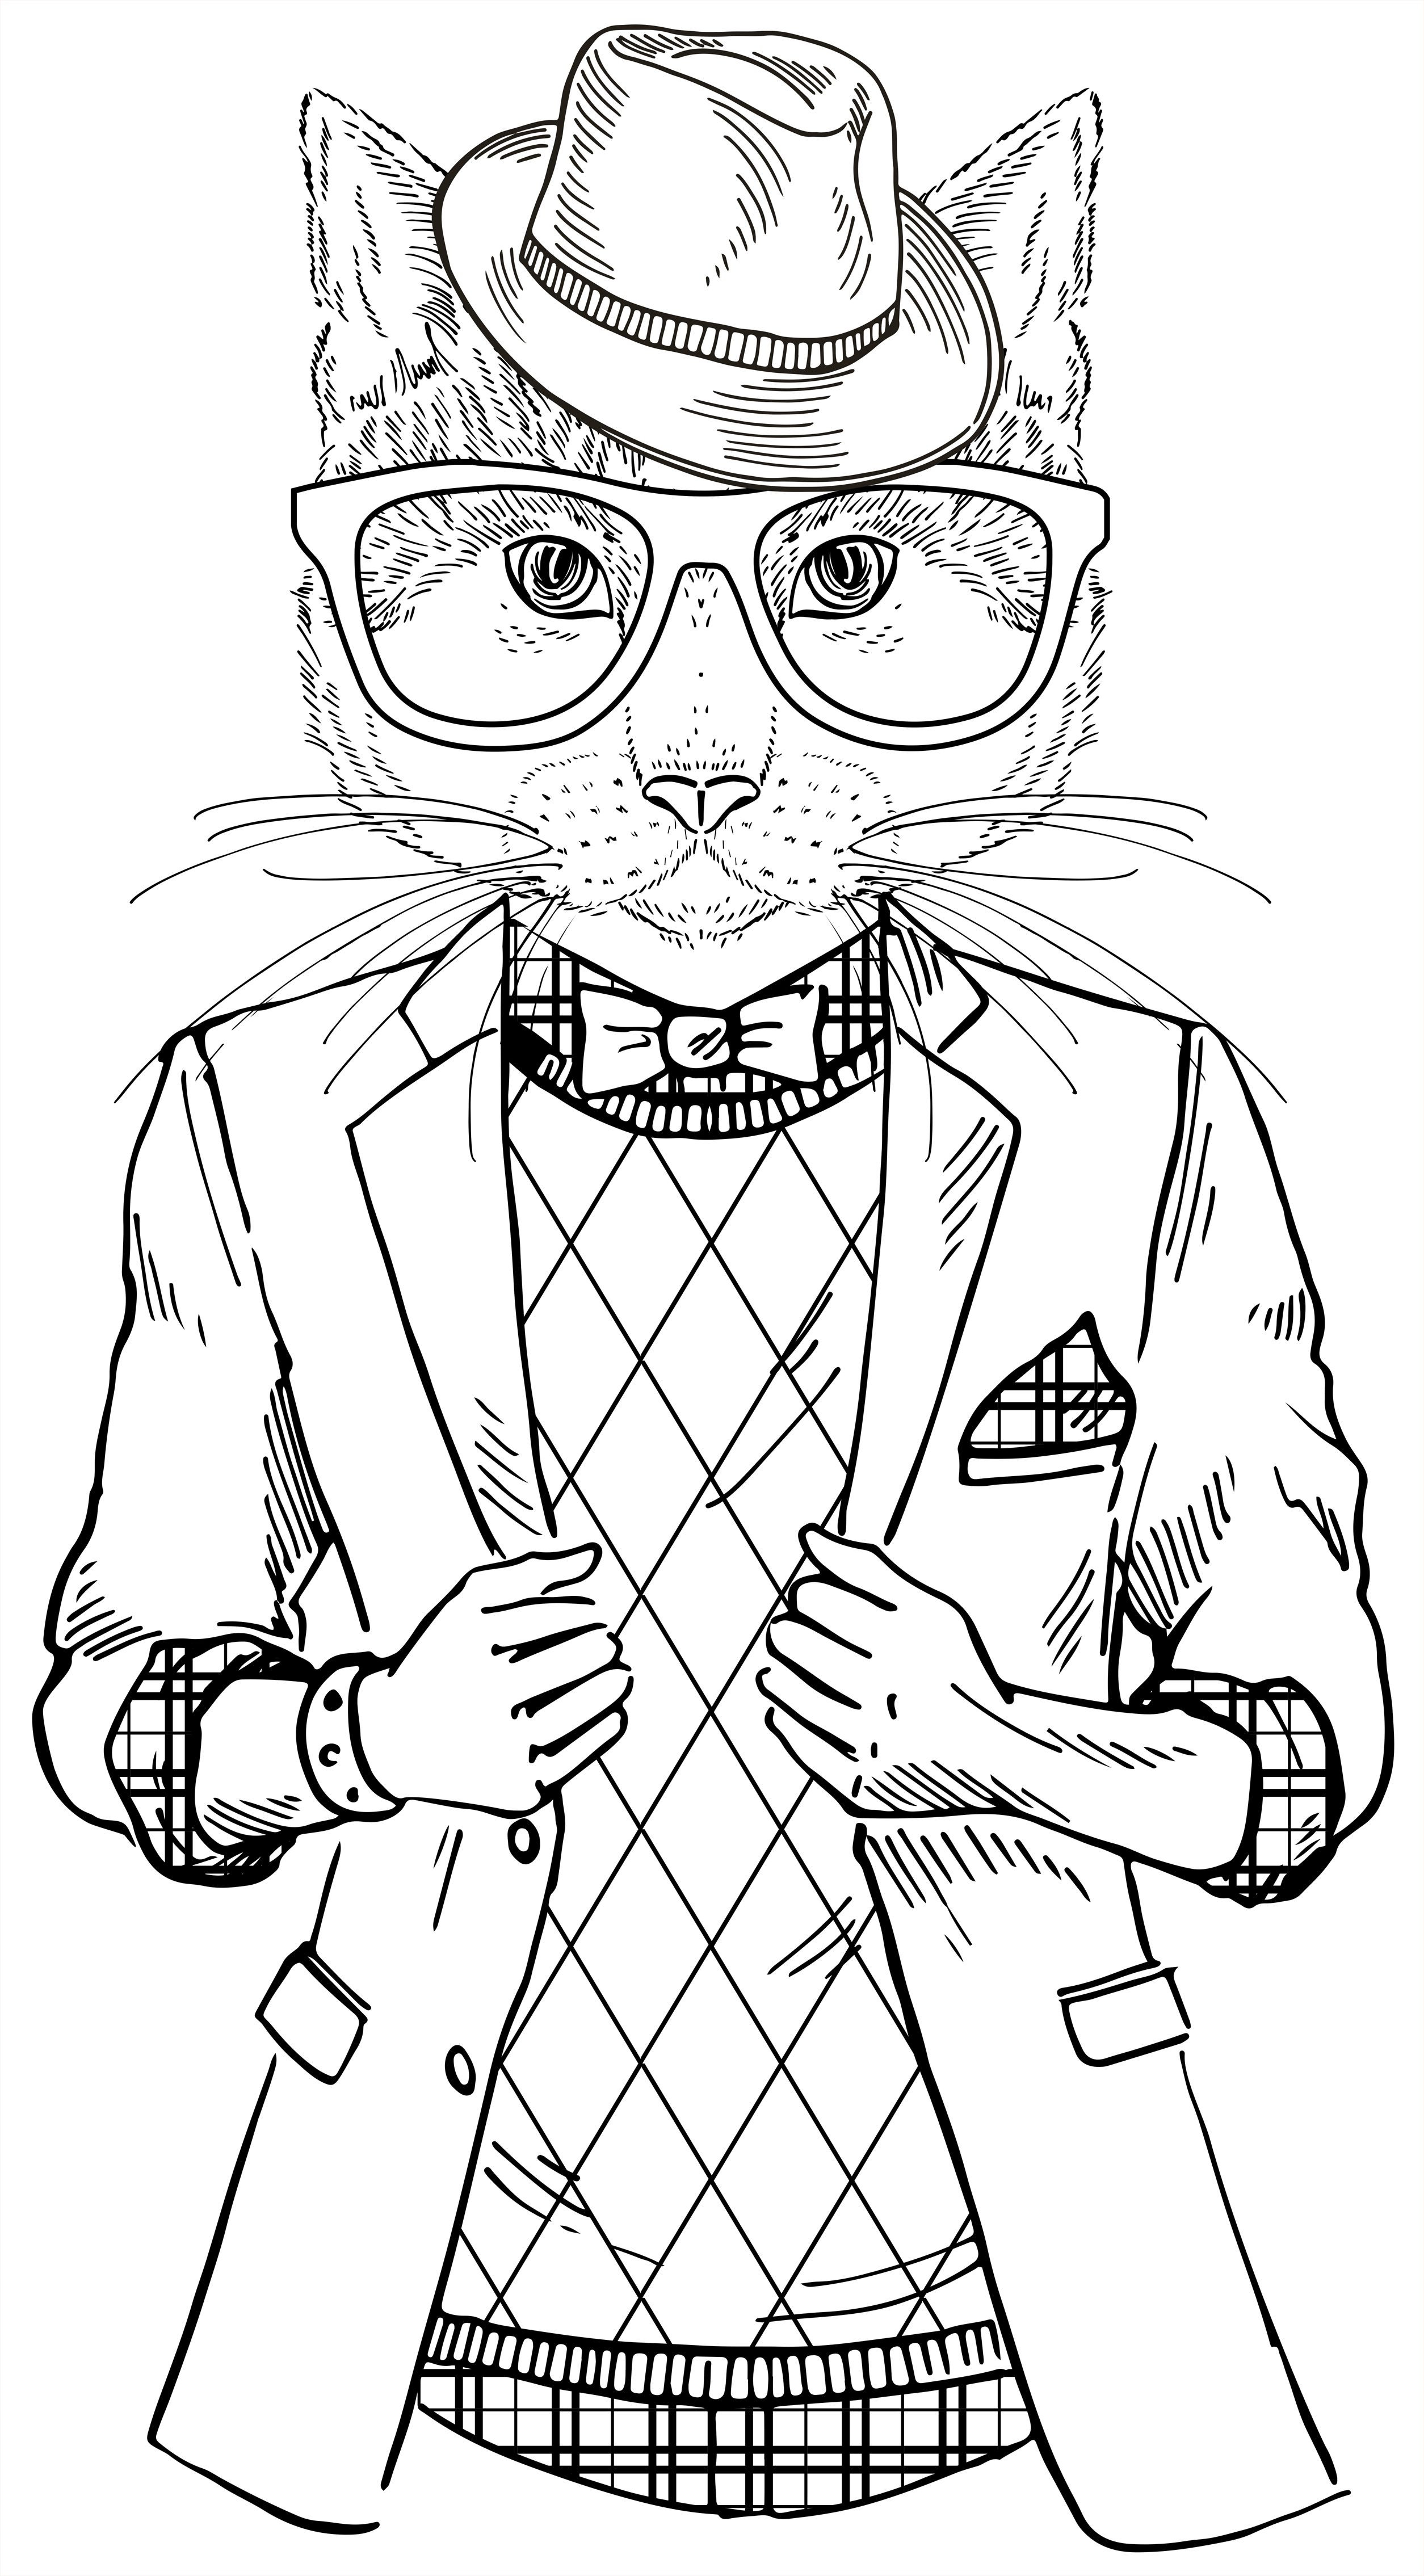 Cool Animal Coloring Pages
 A Cool Cat from "Smooth Operator"